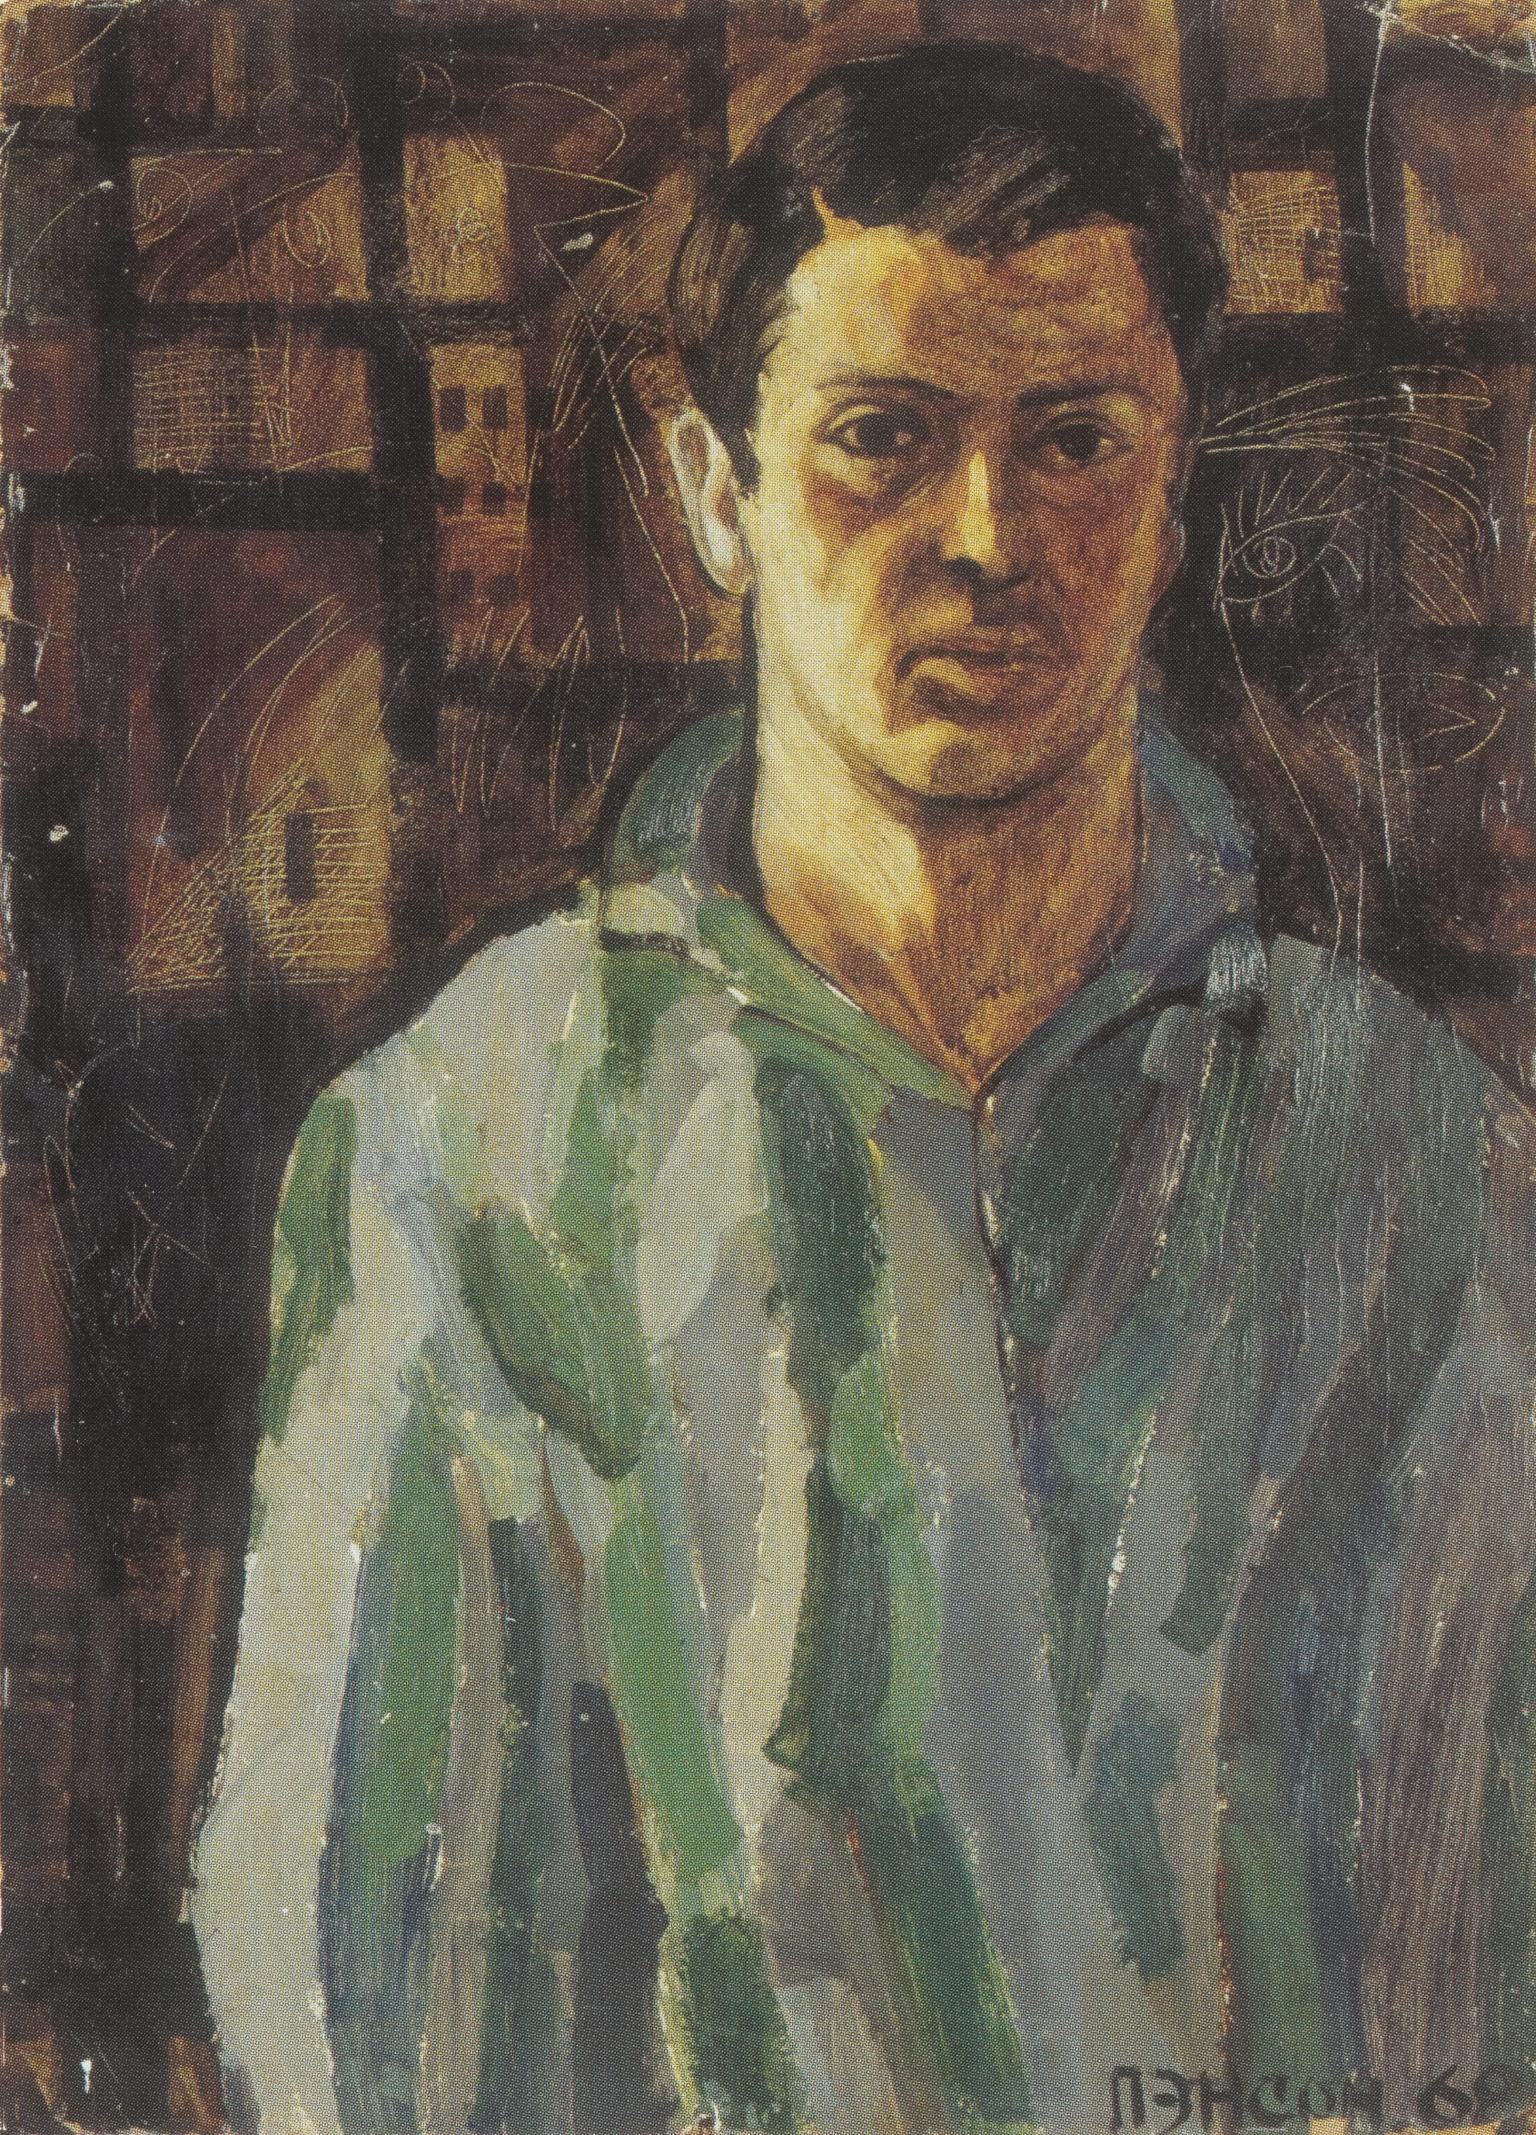 Portrait painting of a man standing in front of bars.